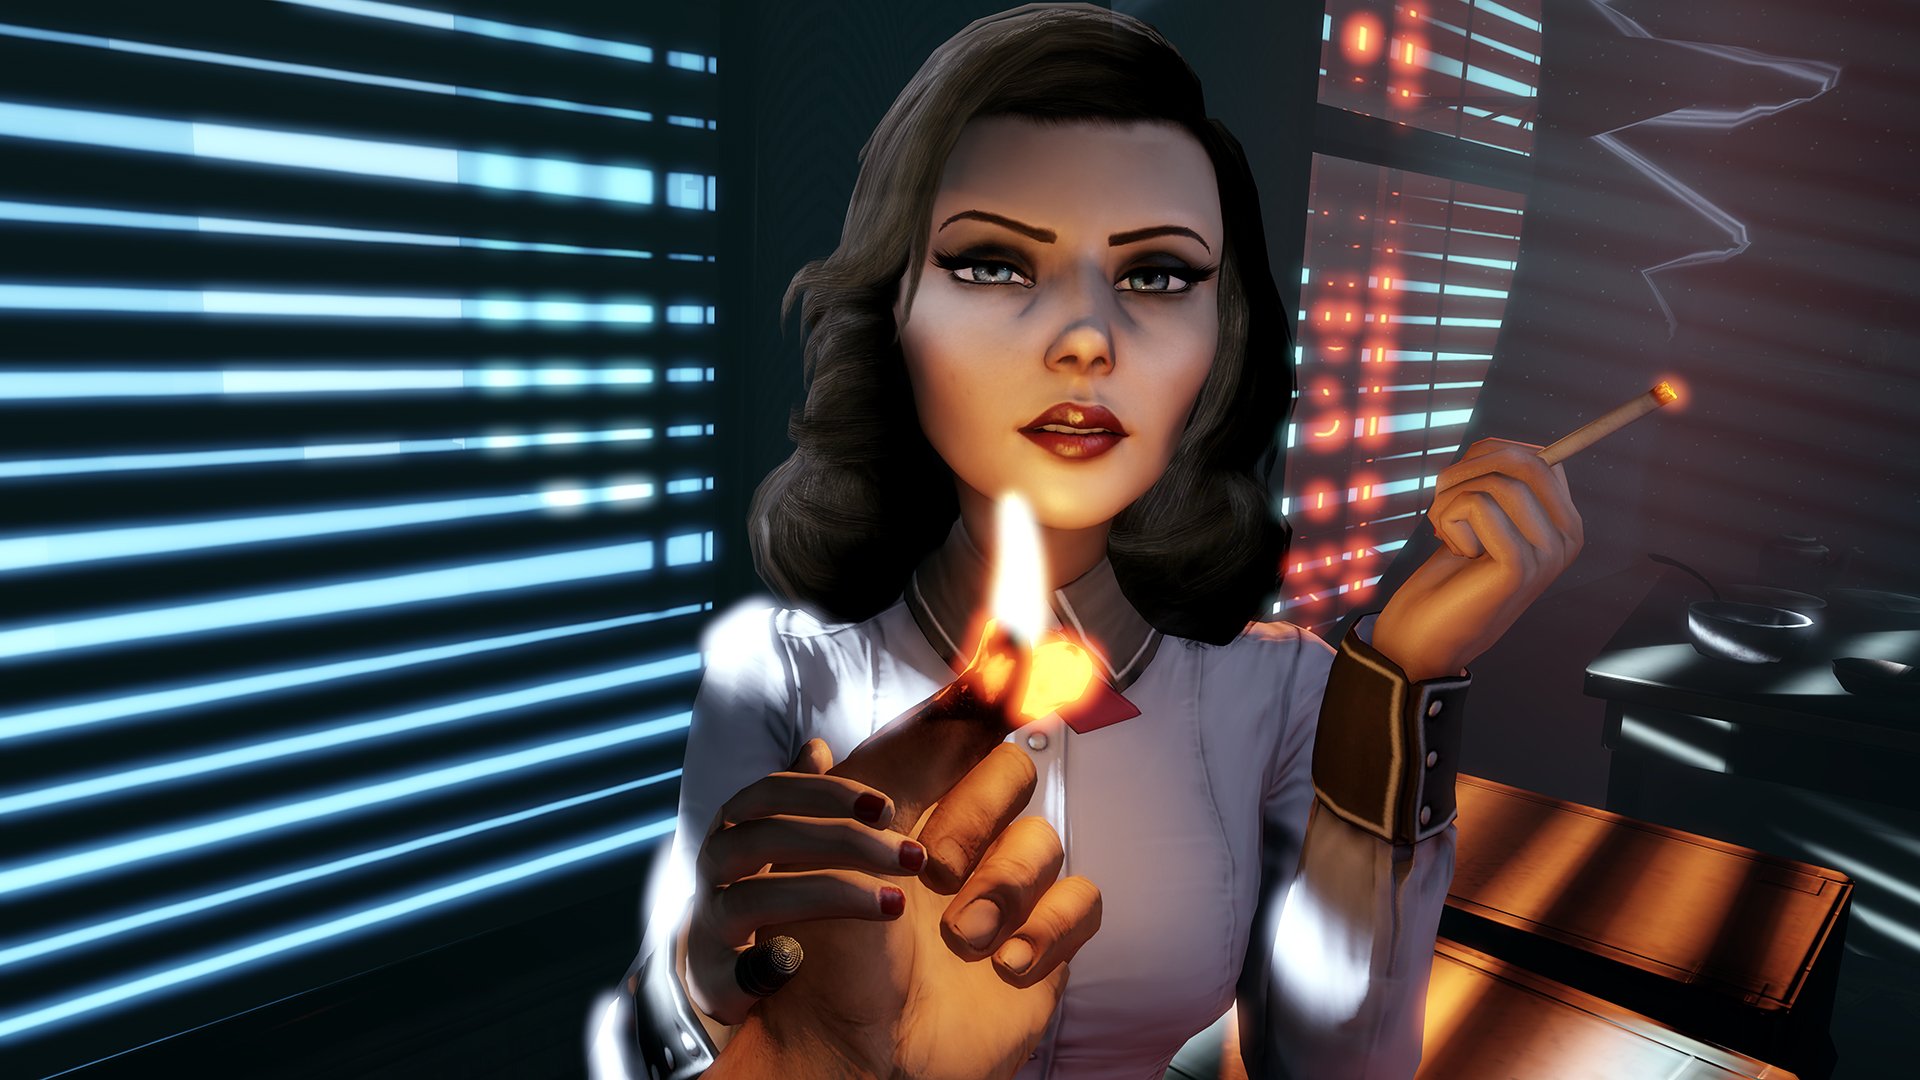 bioshock-infinite-burial-at-sea-episode-one-the-best-pc-game-deals-only-on-indiegala